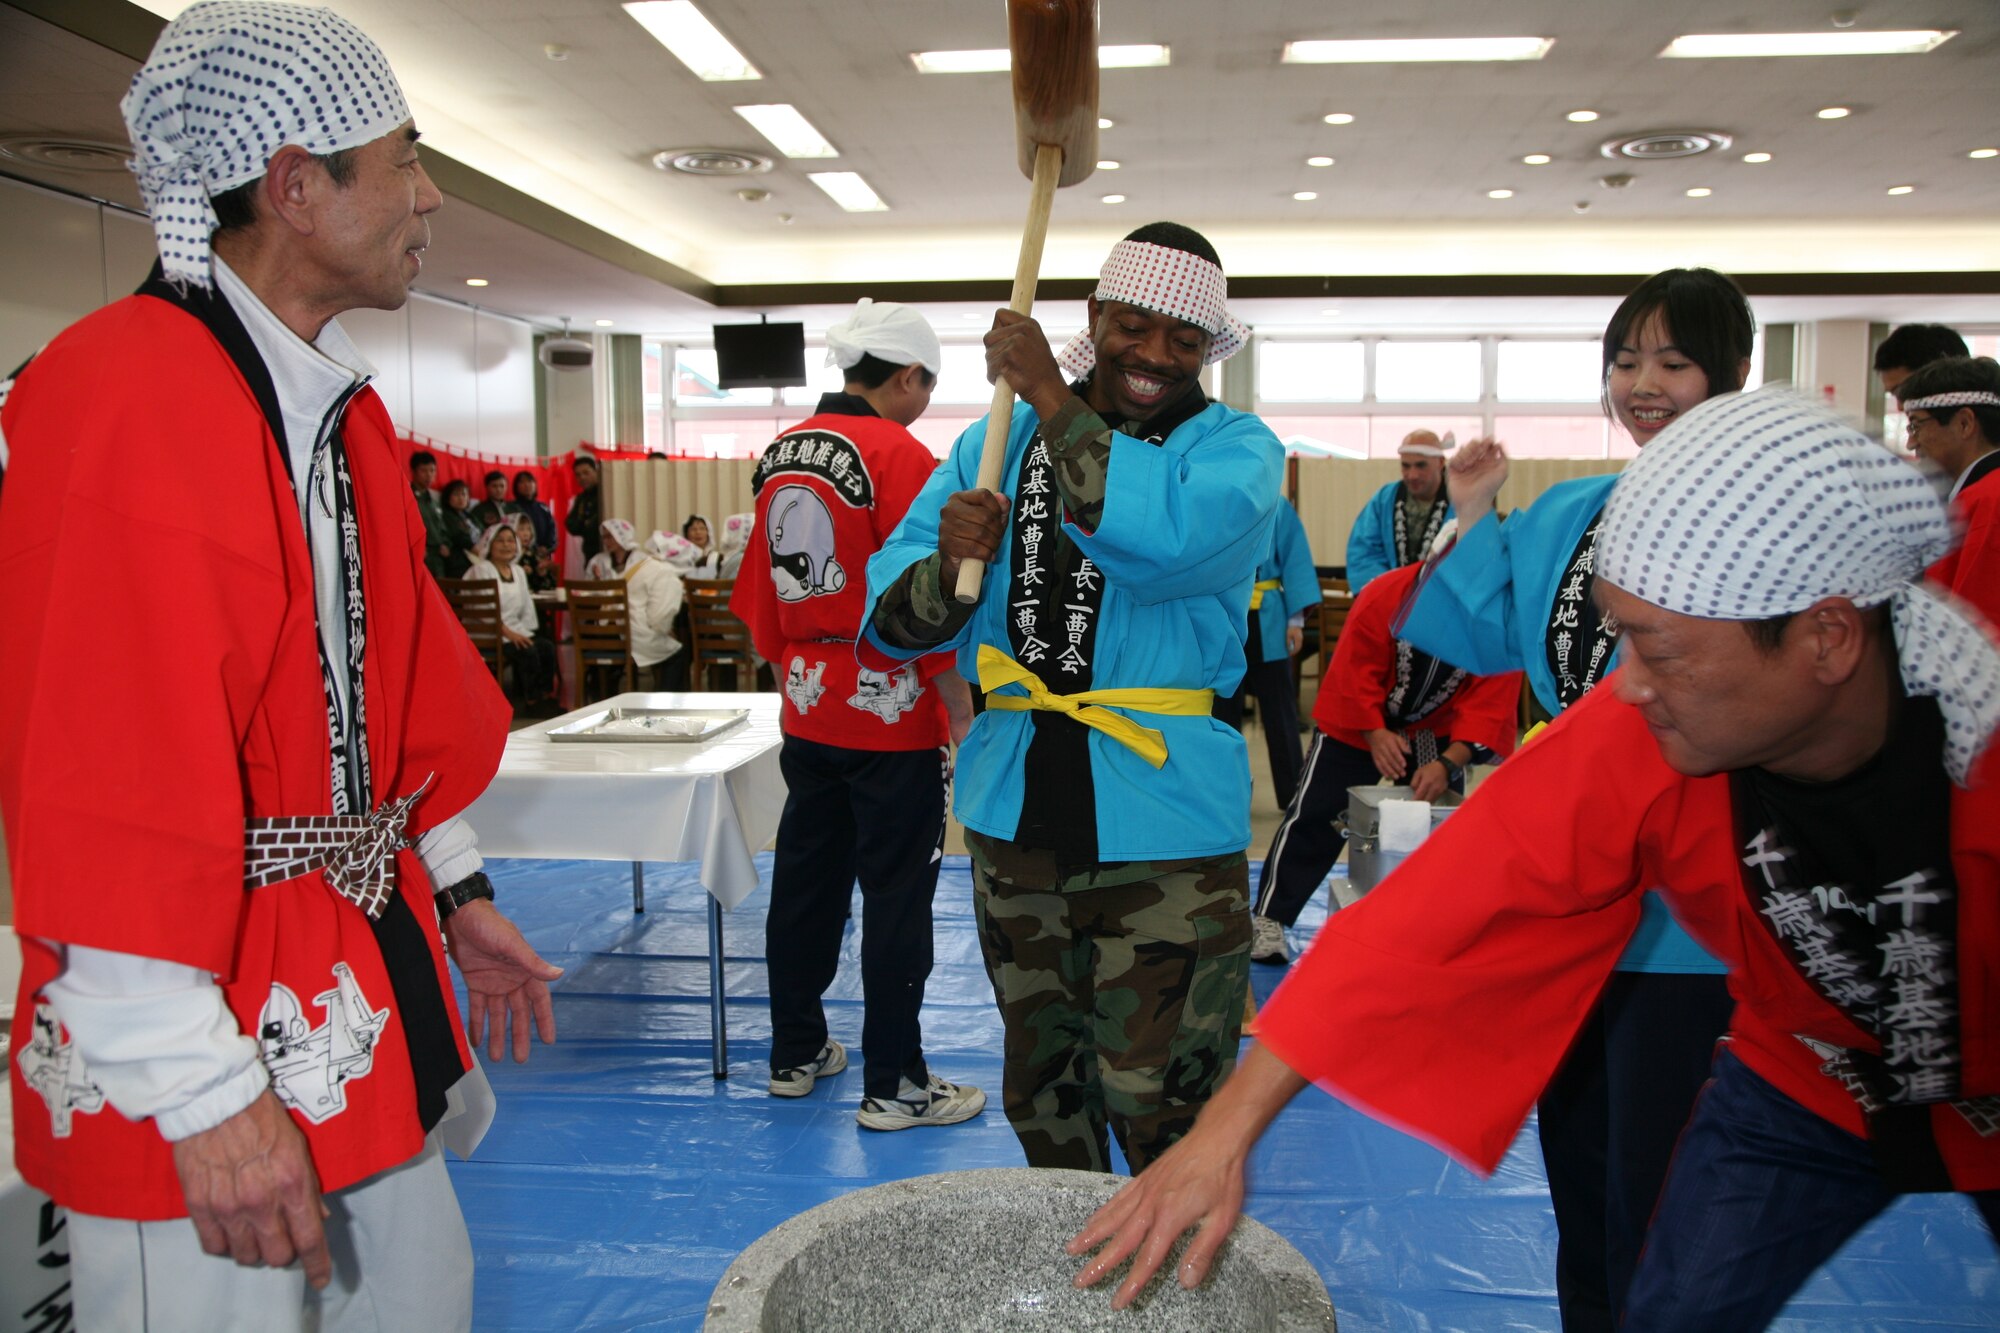 Senior Master Sgt. Tony Mills, 13th Air Force, Detachment 1, superintendent
and ATR lead logistics planner, takes a turn pounding rice during a
traditional Japanese New Year Mochitsuki ceremony at Japan Air Self-Defense
Force's Chitose Air Base Dec. 12. Sergeant Mills and approximately 70 Airmen
from the 18th Wing participated in a bilateral training event with the
JASDF's 2nd Air Wing as part of the Aviation Training Relocation program. 
(Courtesy photo)
